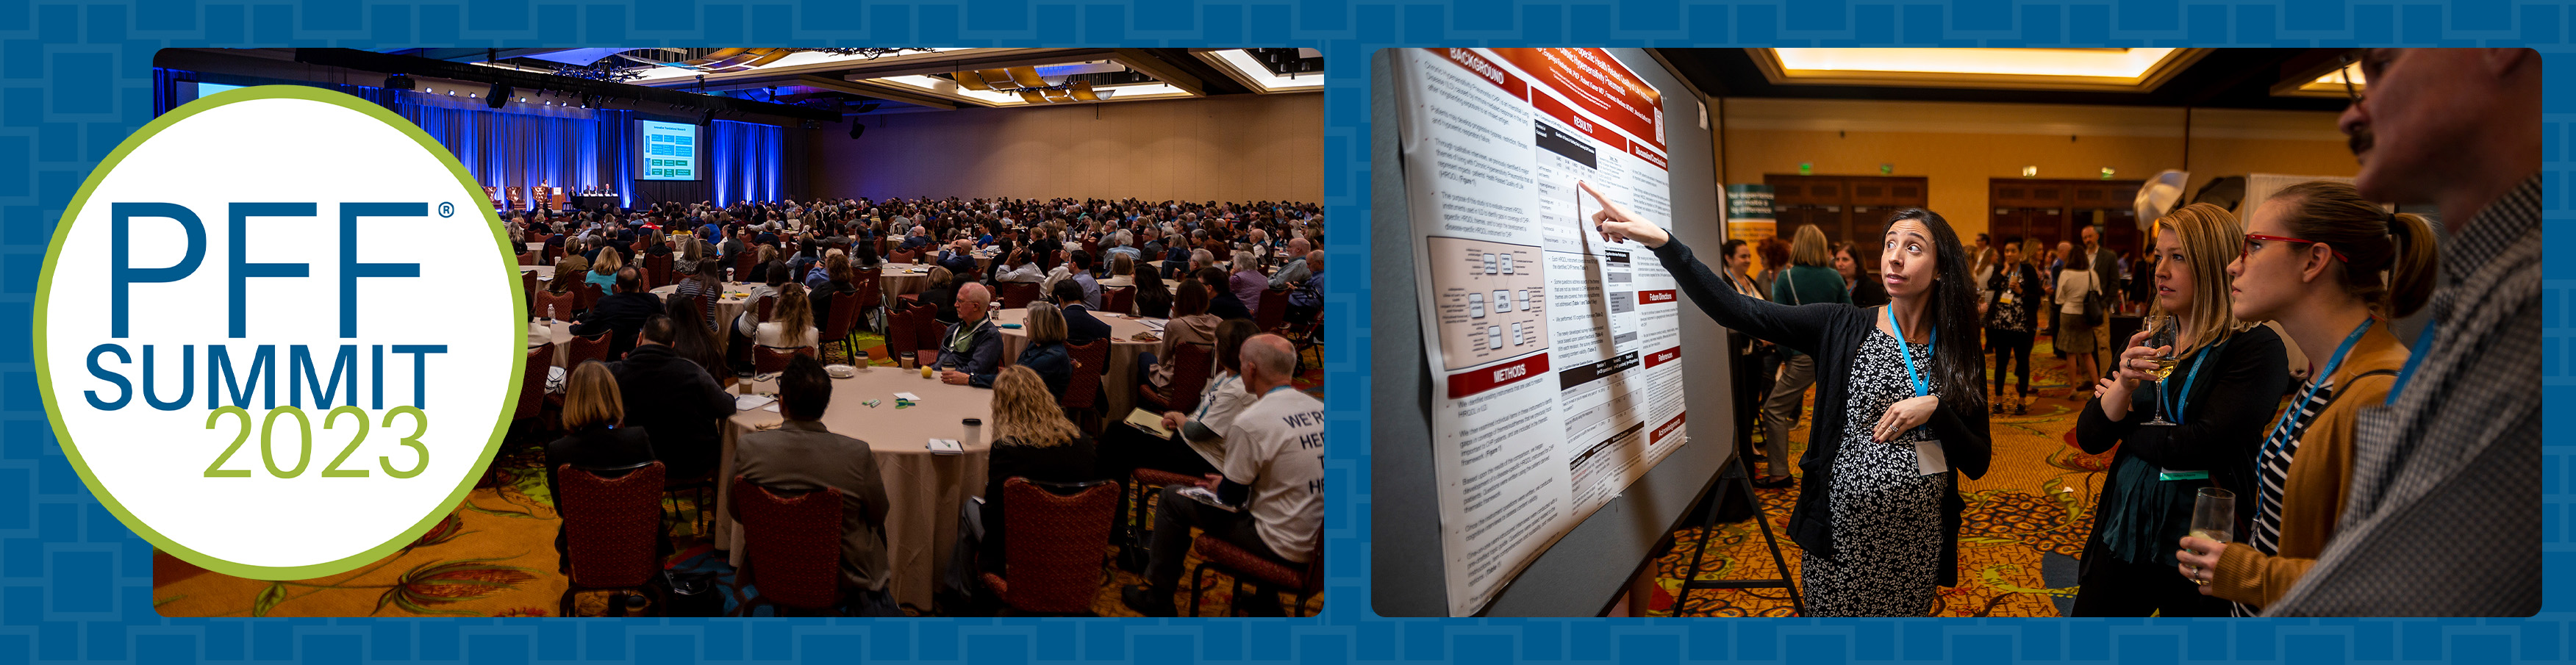 PFF Summit crowd and poster presentation